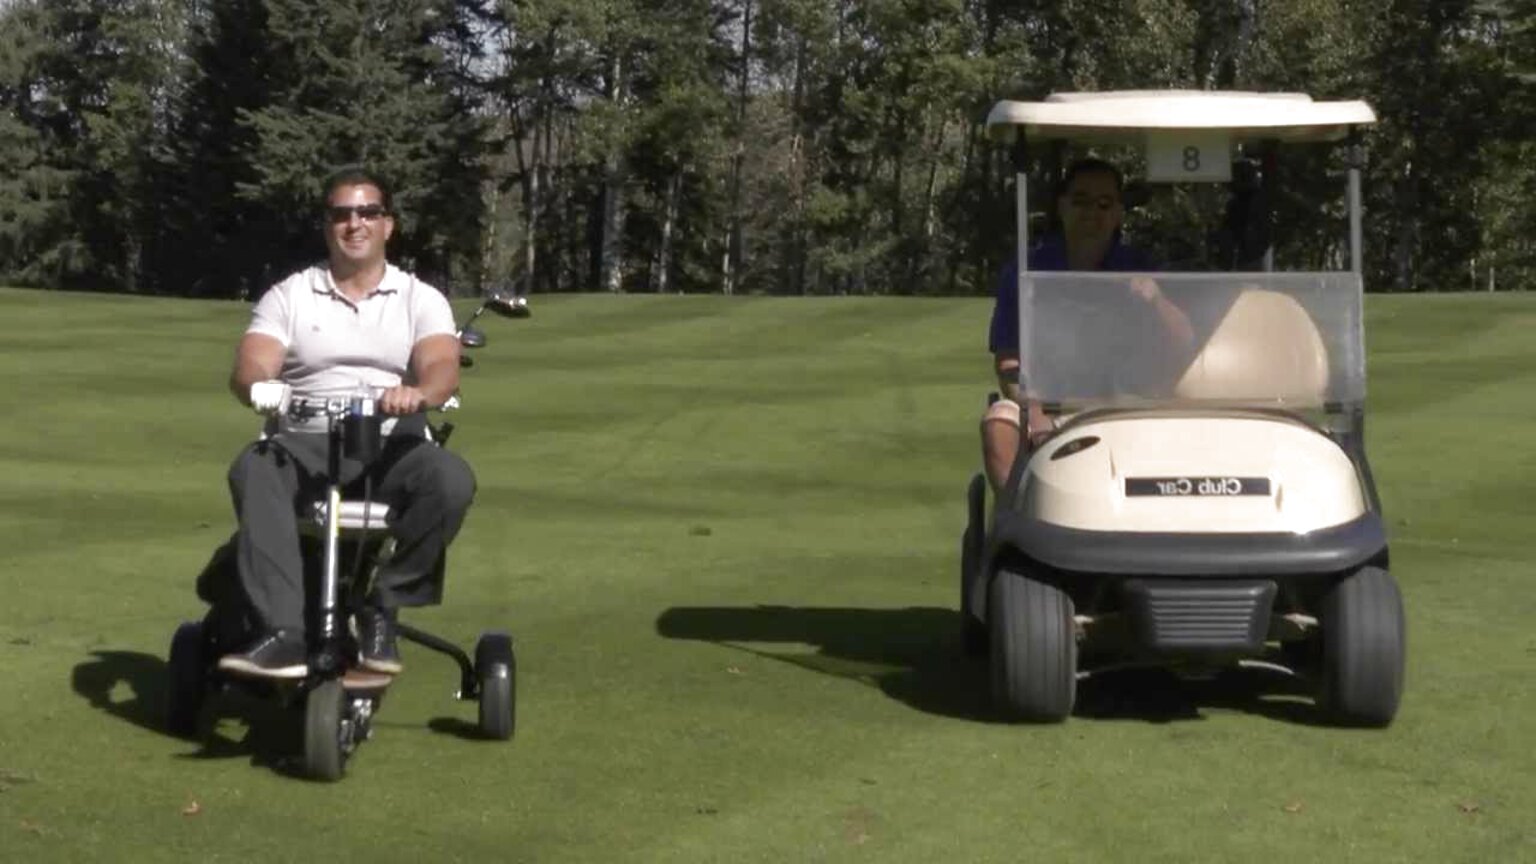 ride on golf buggies for sale